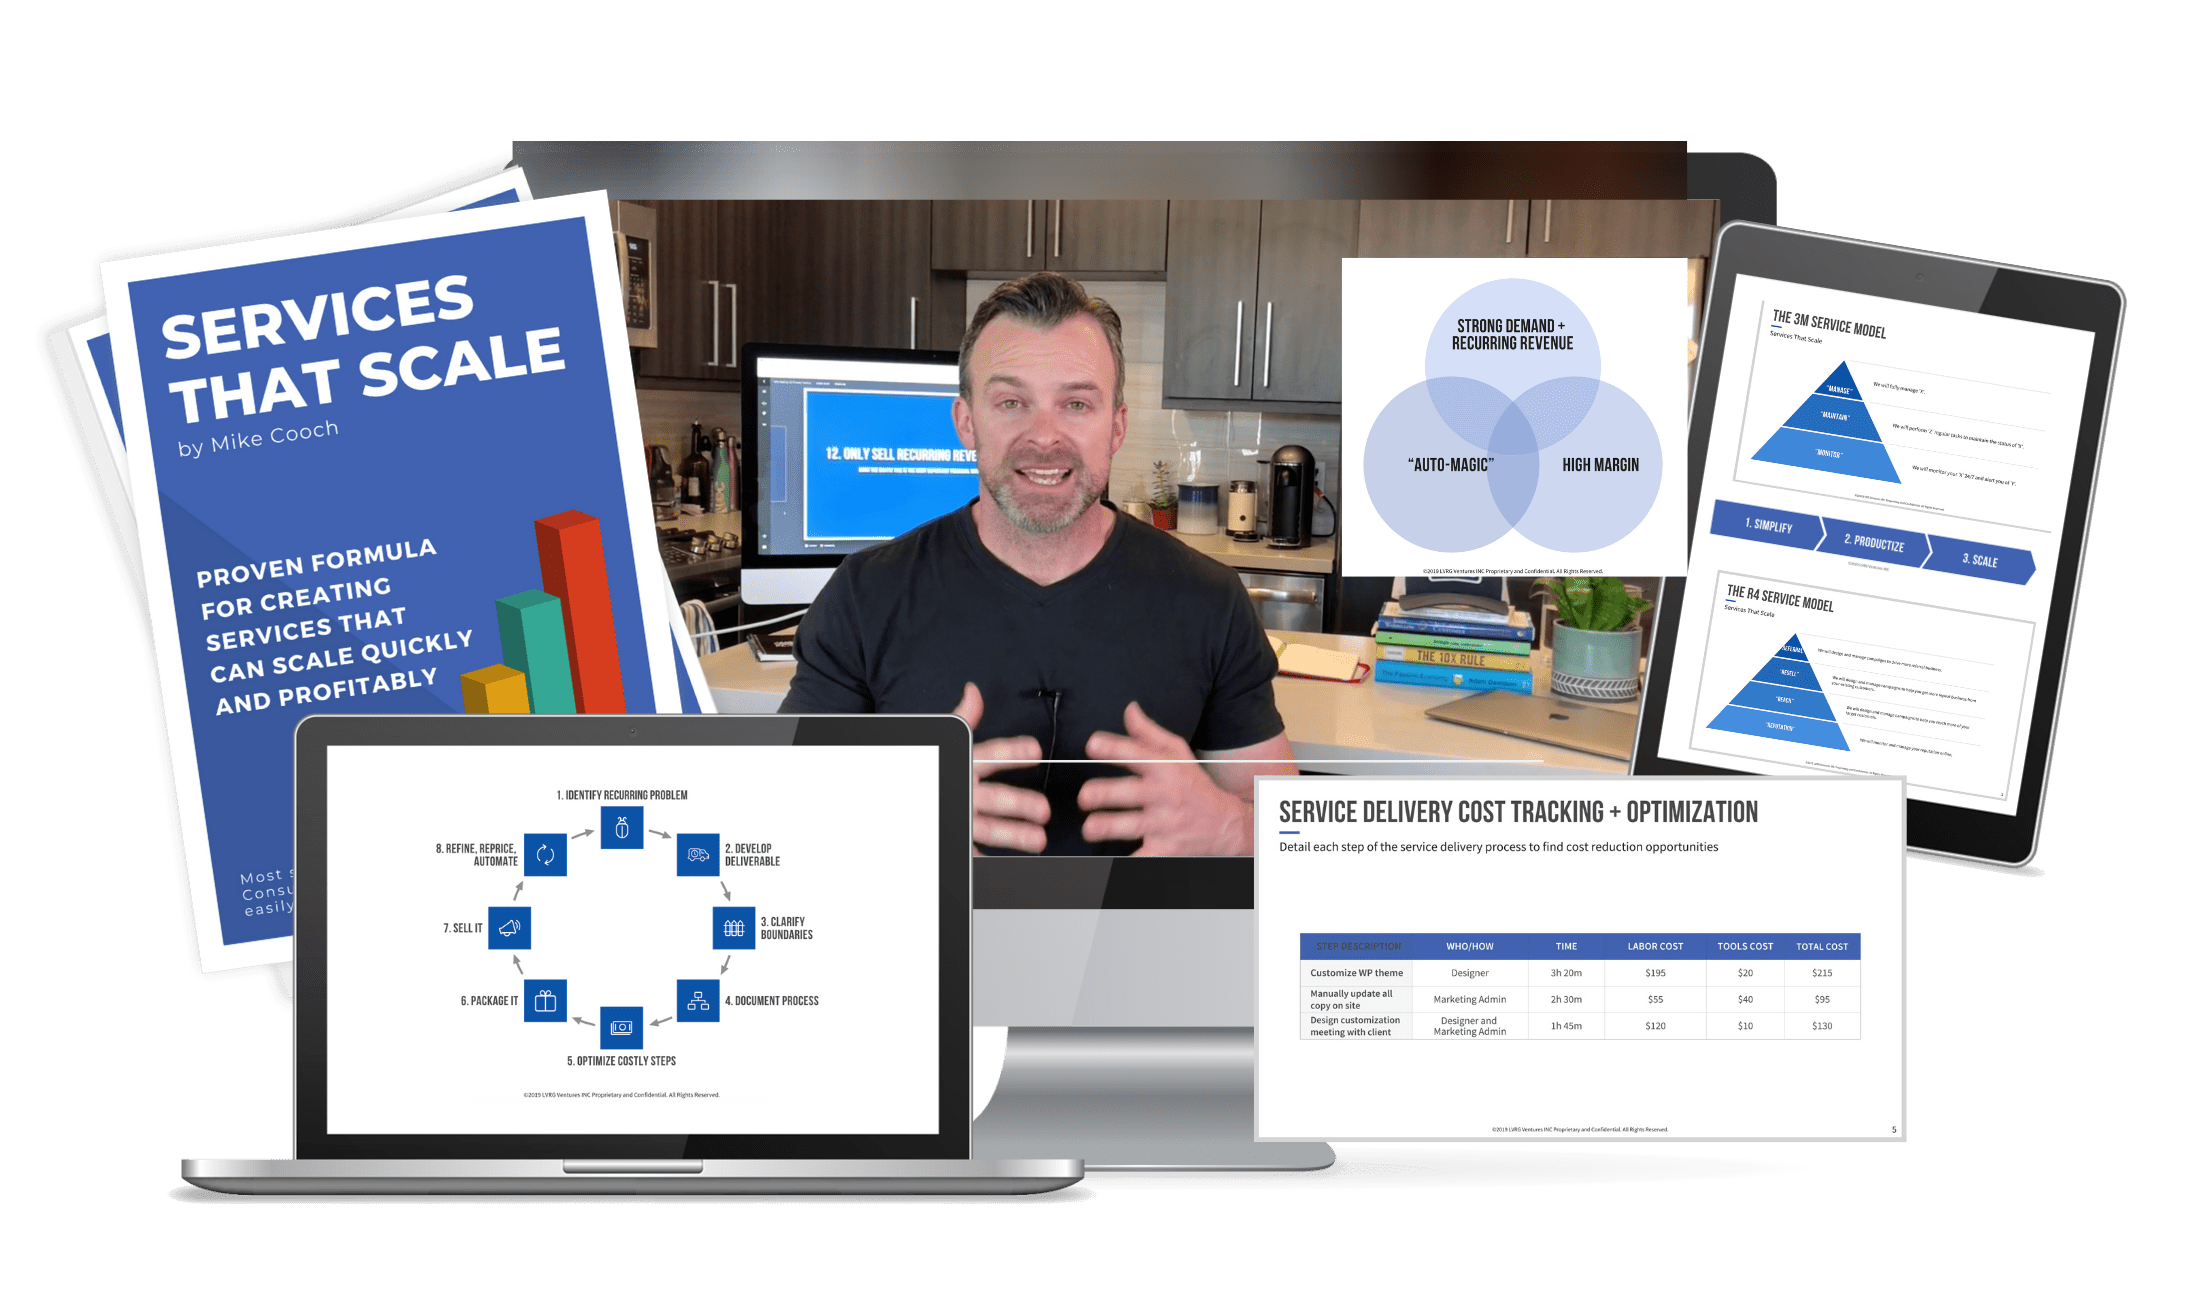 [SUPER HOT SHARE] Mike Cooch – Services That Scale Download